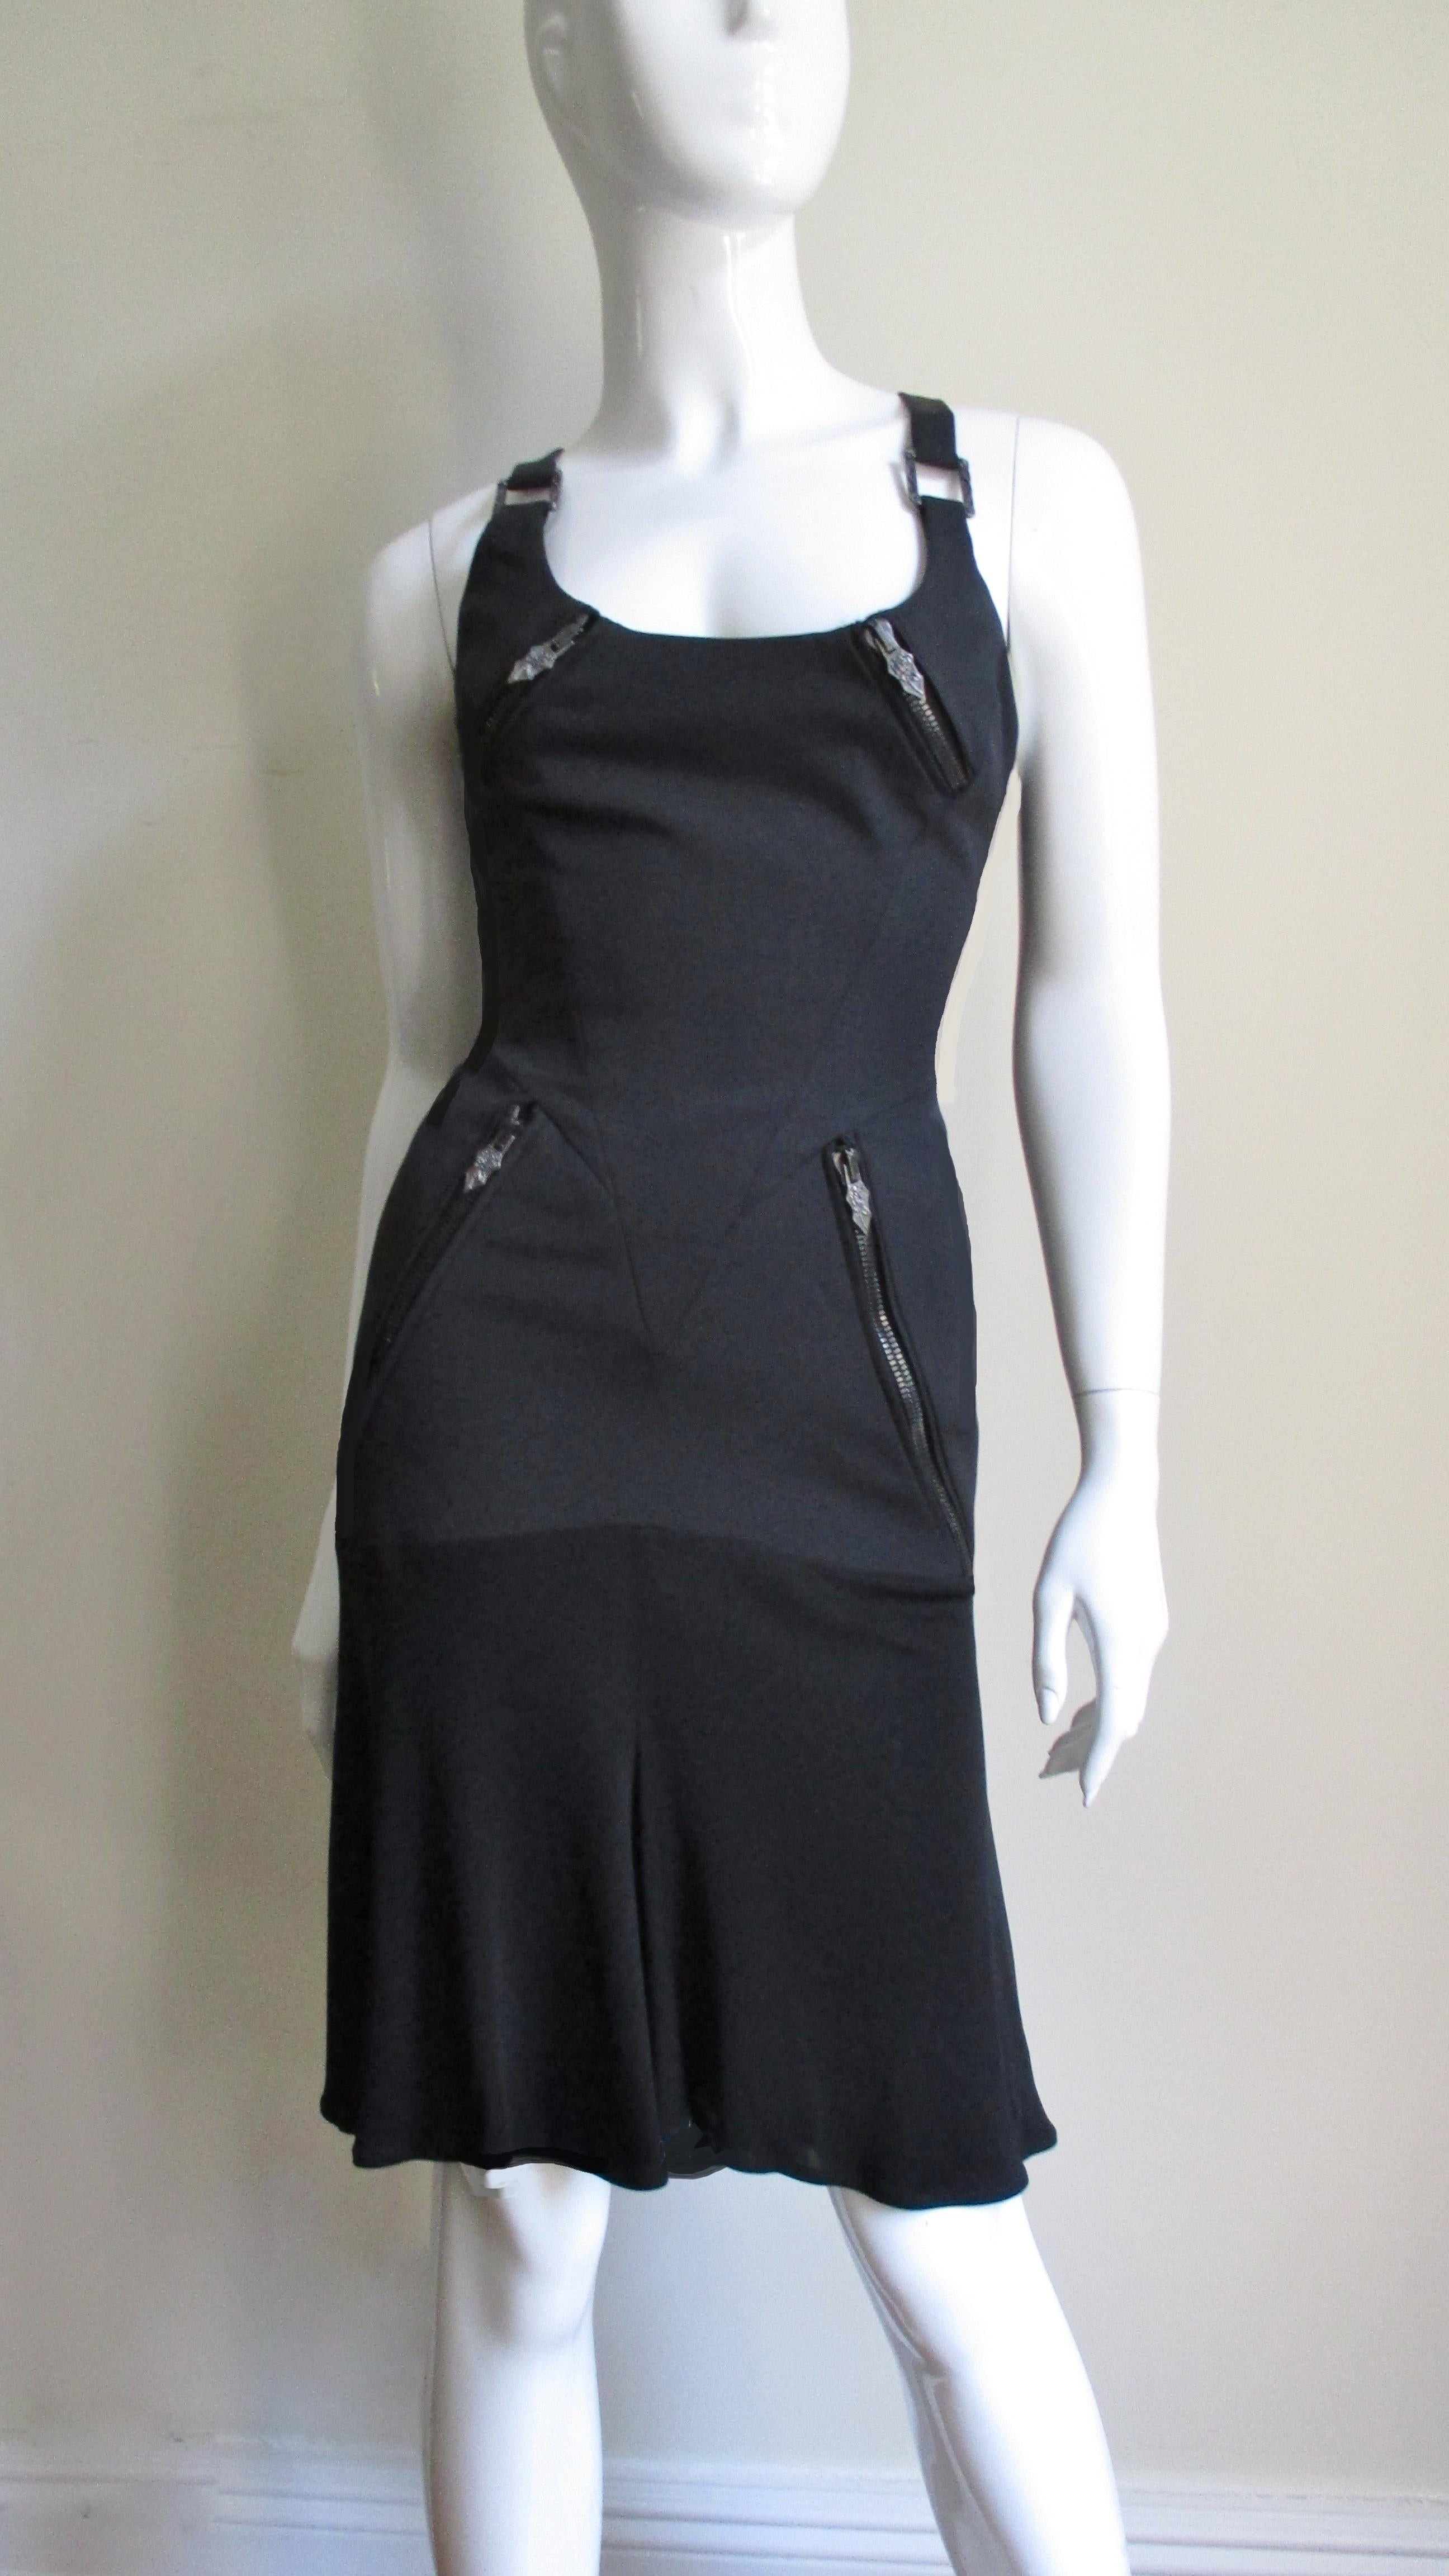 A fabulous black silk dress from Versace. The bodice has a scoop neckline, princess seaming for a great fit and 1